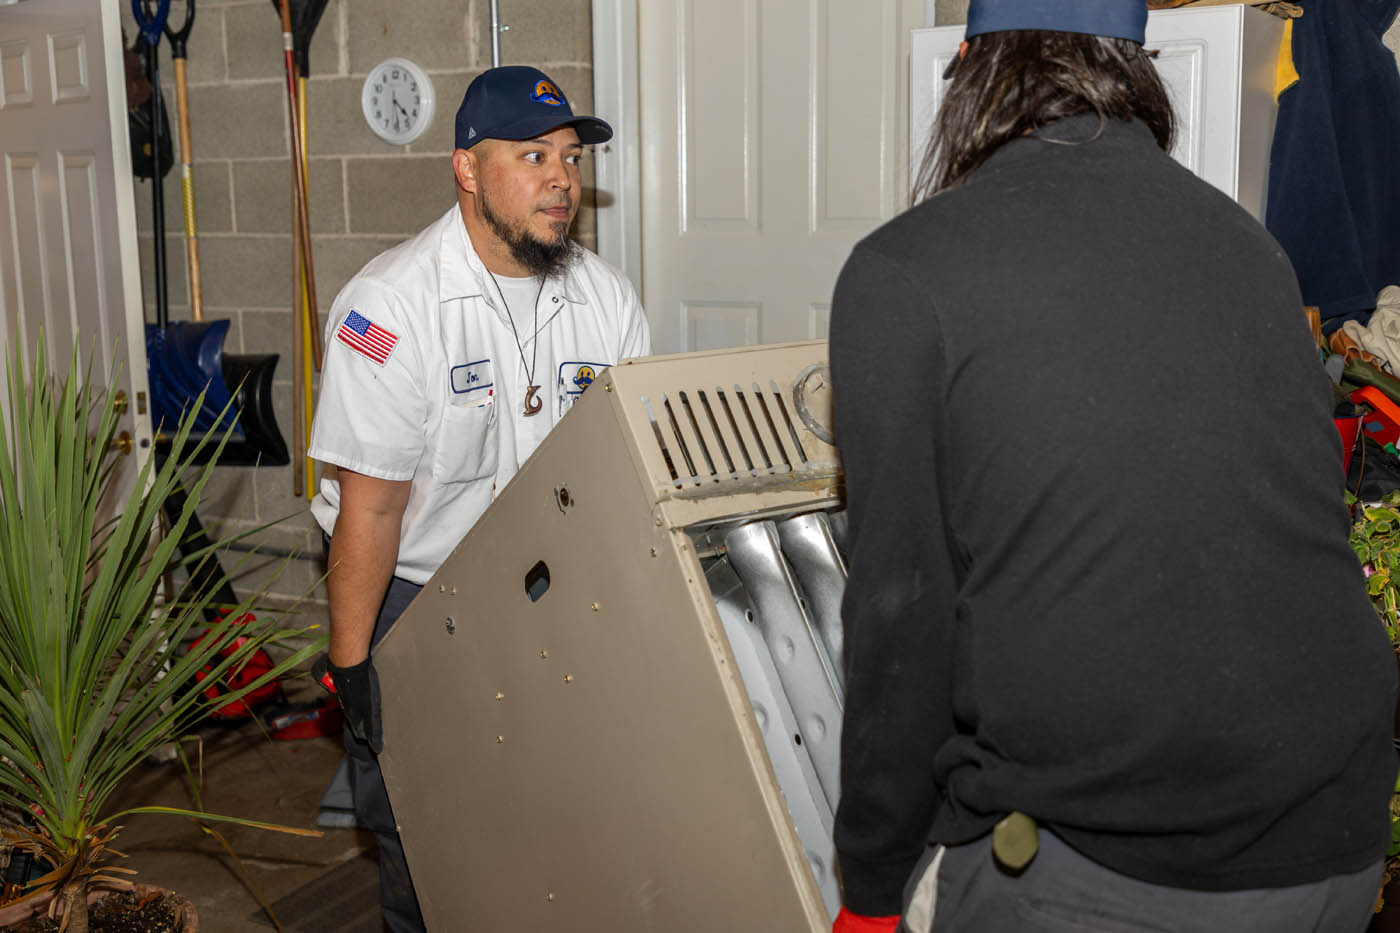 Absolute Comfort technicians moving equippment - learn what makes us the best heating company.